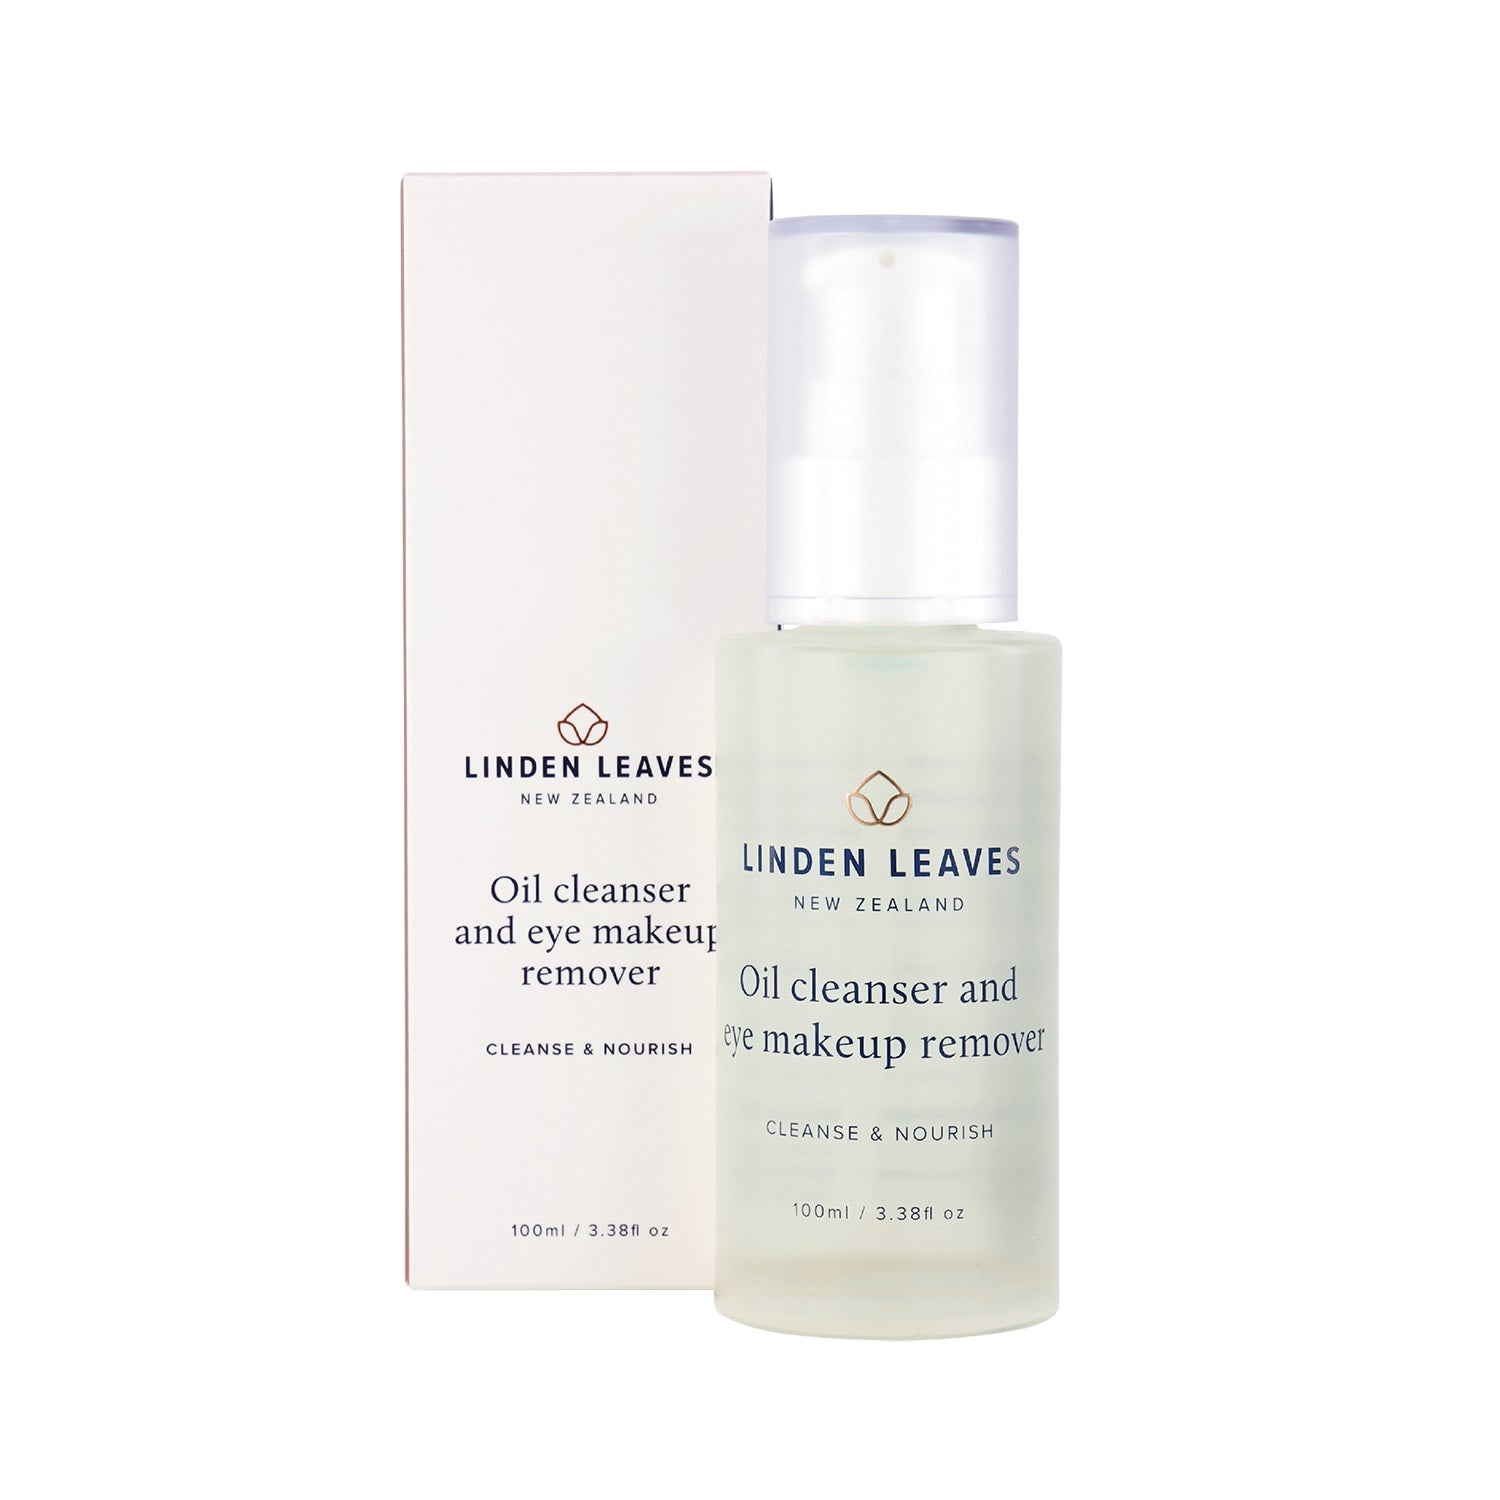 Linden Leaves Oil Cleanser And Eye Makeup Remover 100ml.